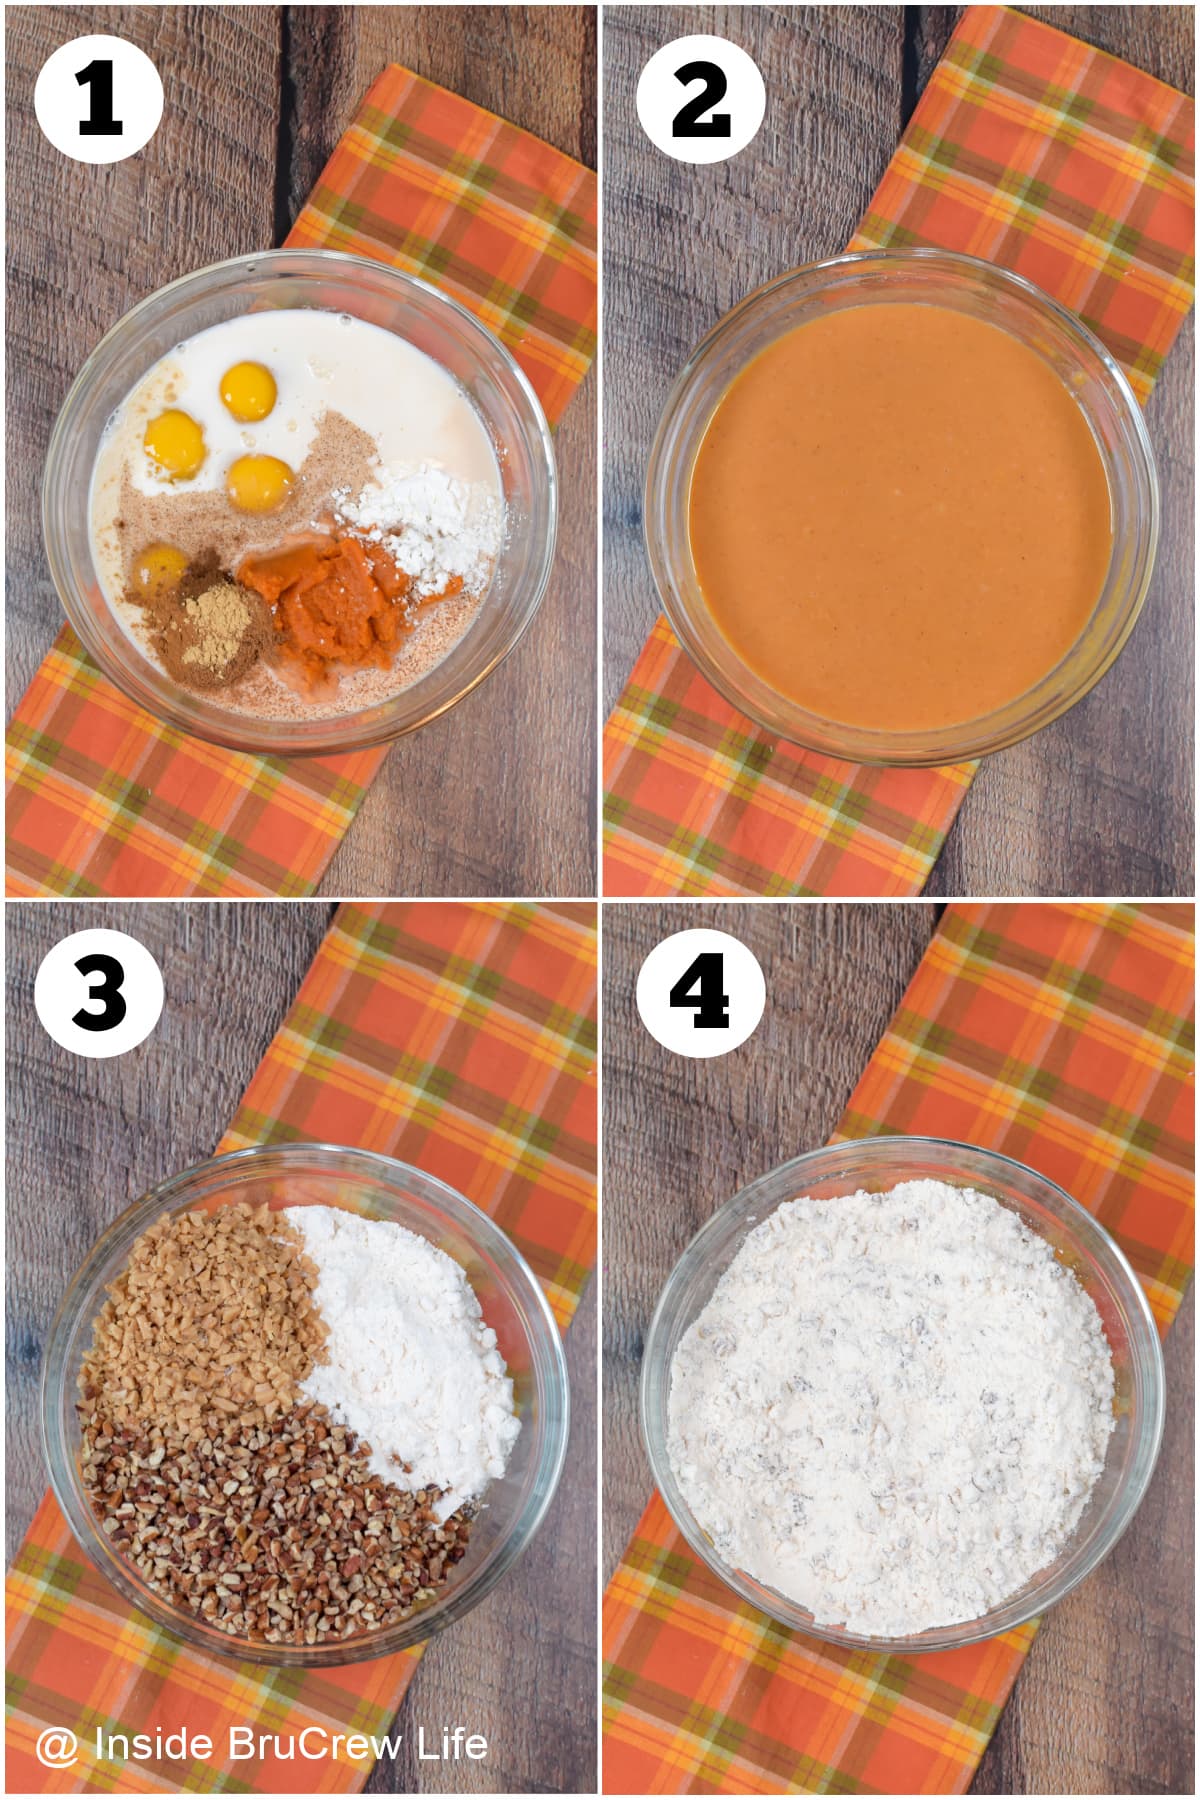 Four pictures showing how to make pumpkin filling and streusel topping.